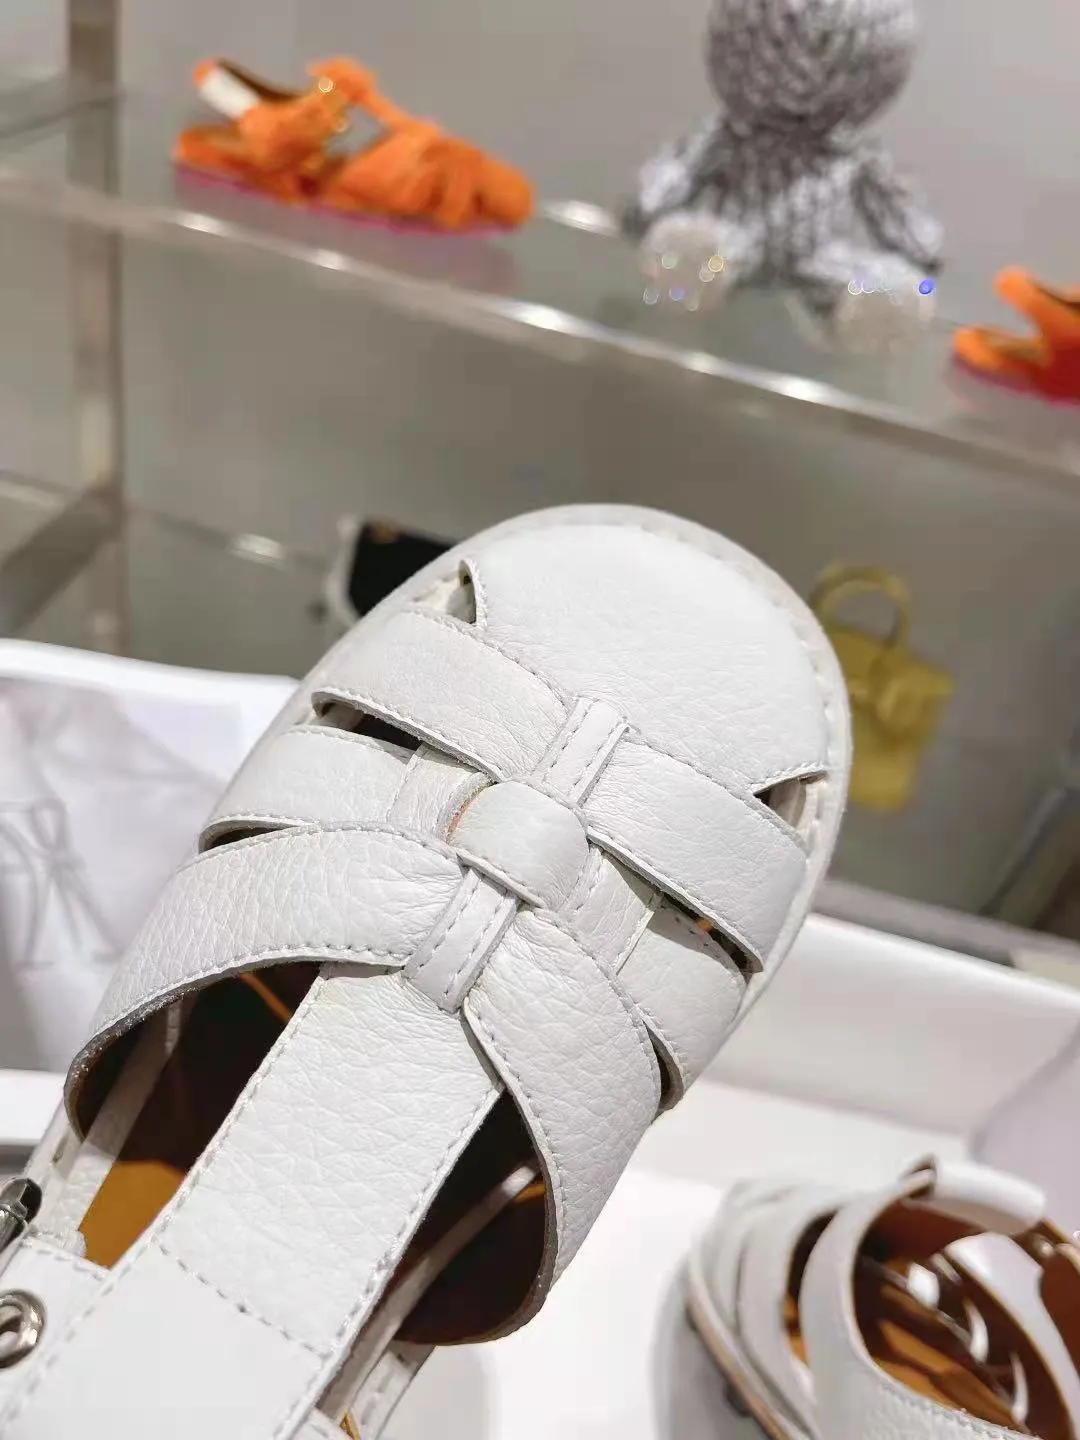 Summer Ladies Brand Sandals New Retro Style Roman Sandals Sexy Horsehair Metal Buckle Leather Casual Shoes 35-40 With Box